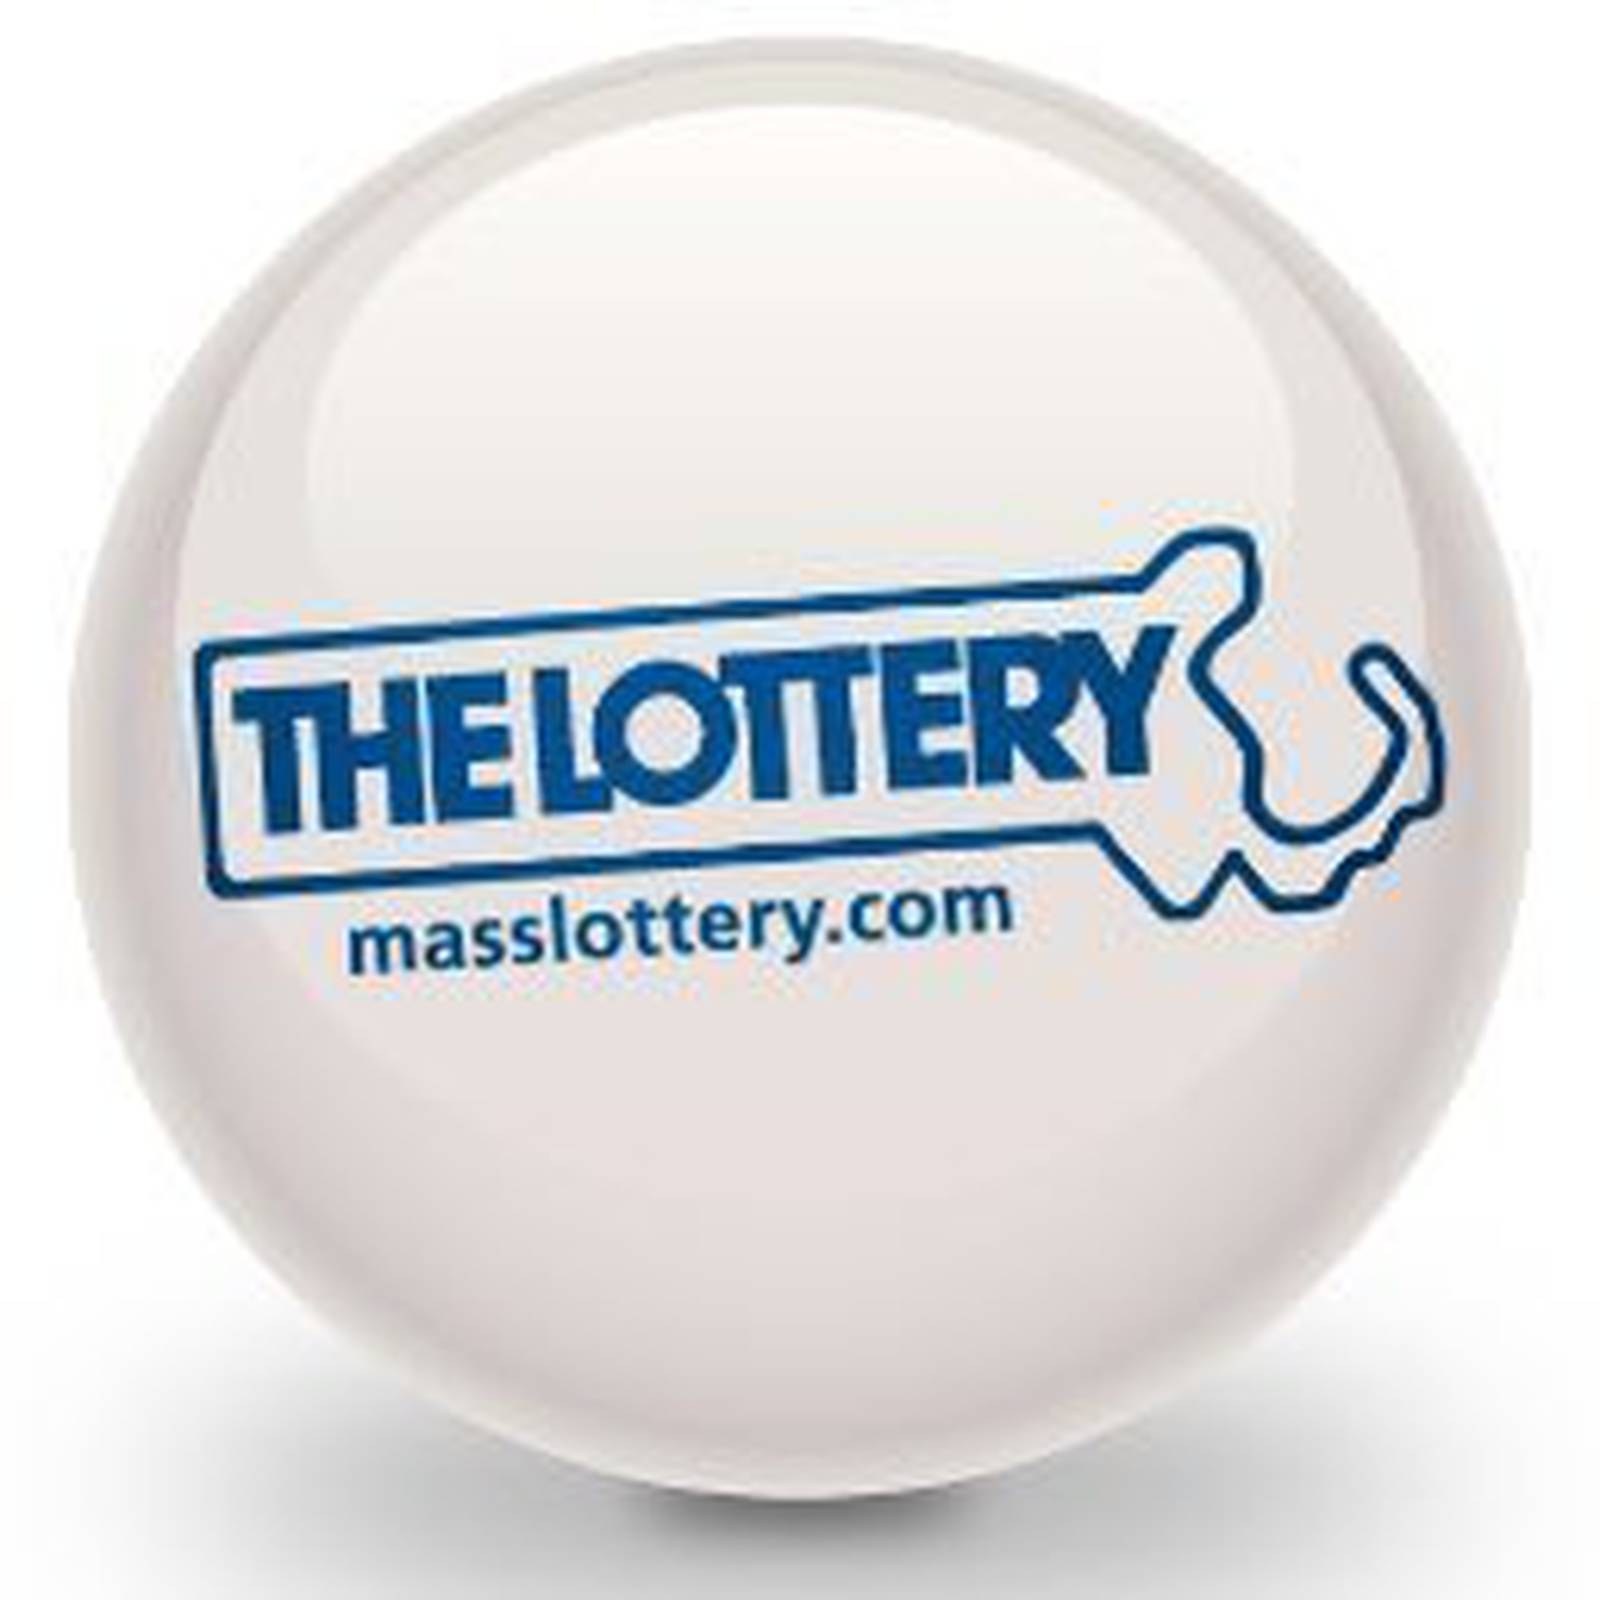 First 20,000 winner selected in Mass Lottery’s 1 million holiday